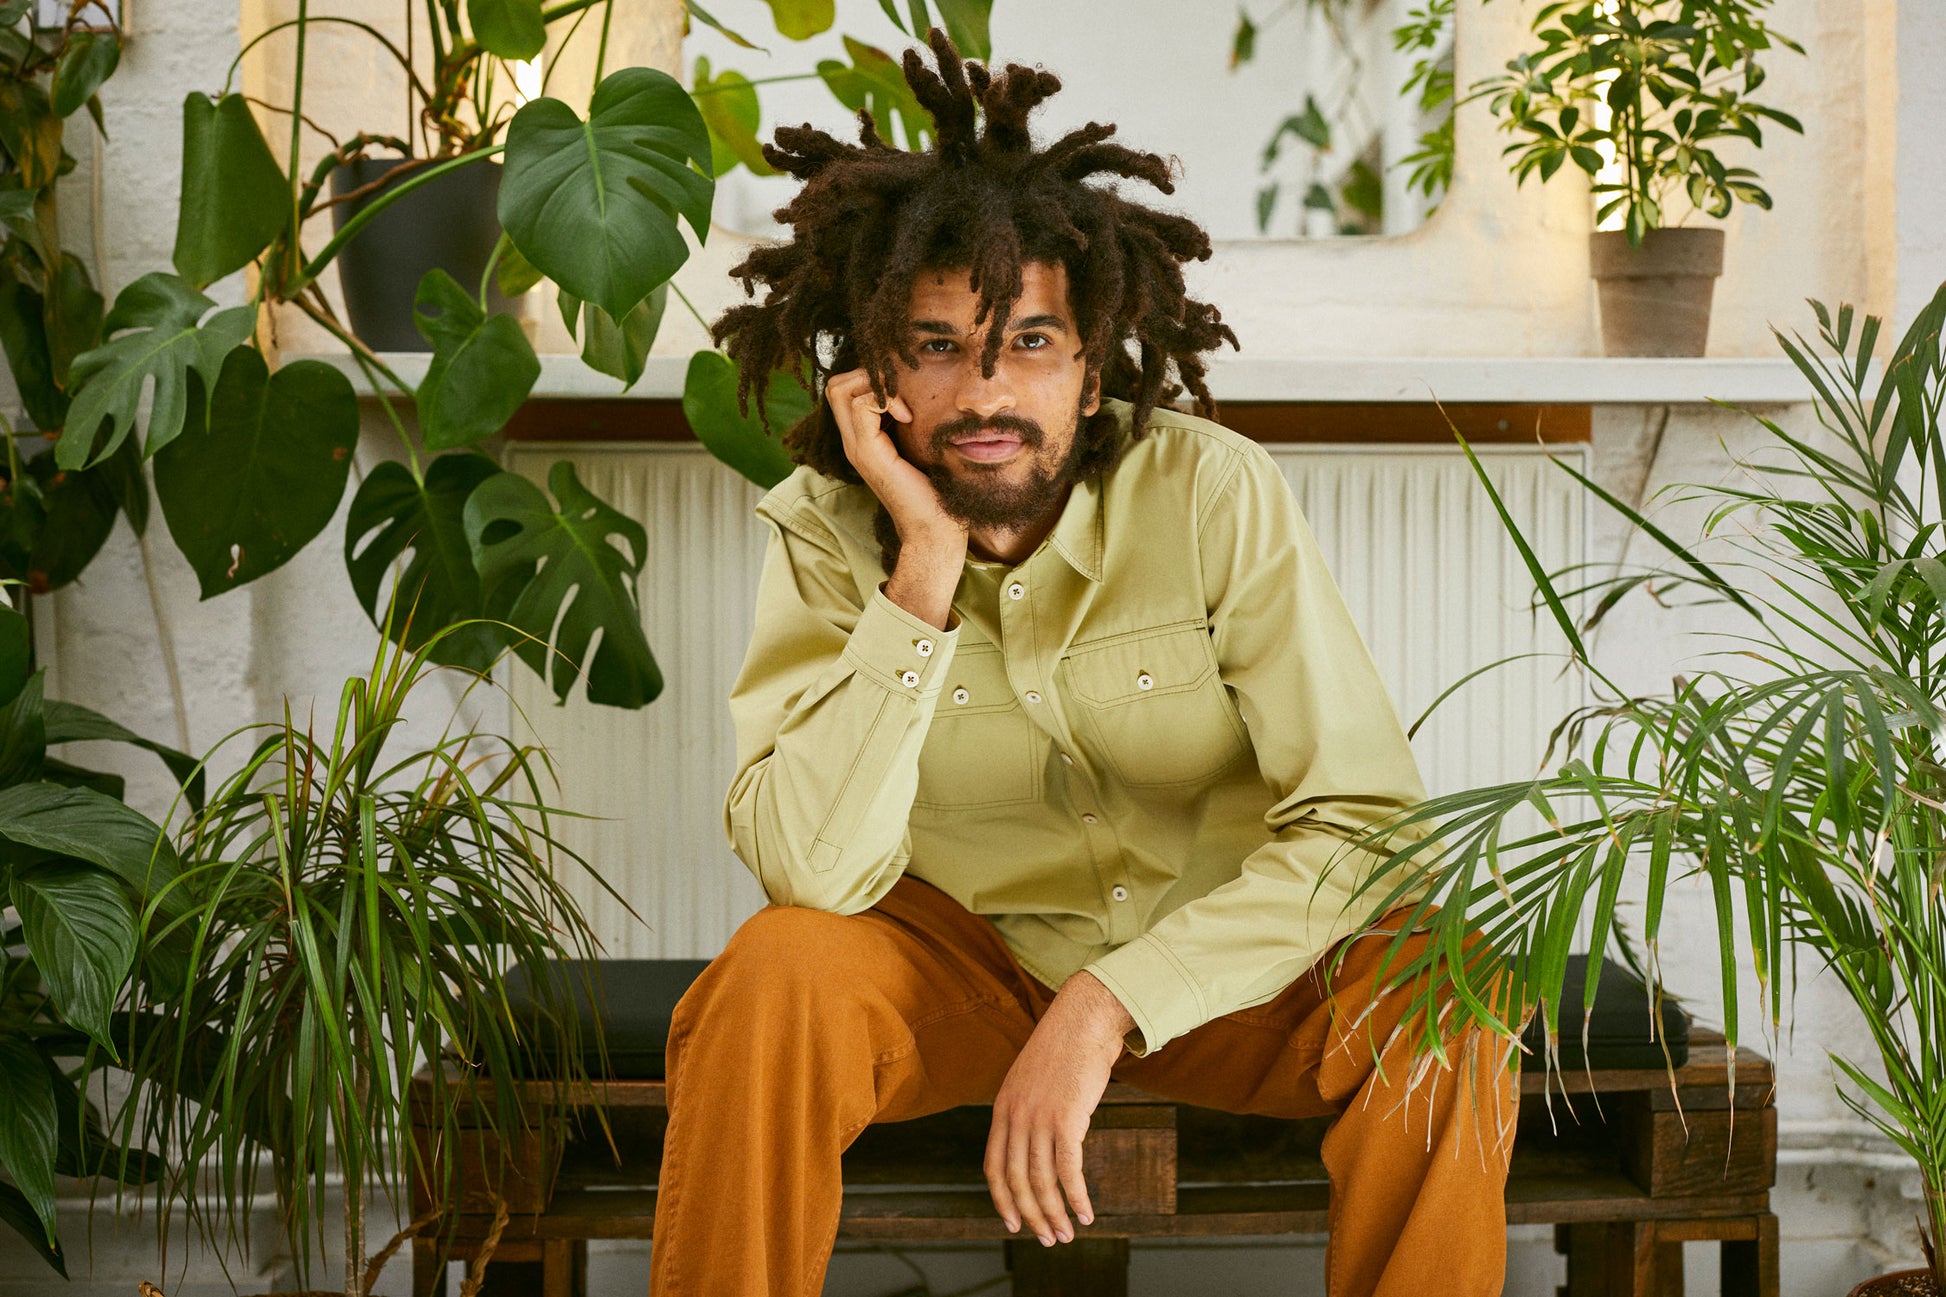 Model sits on a bench surrounded by house plants. One arm leans on his leg and his head leans on the other hand. He's wearing Saywood's Eddy Mens Khaki Shirt with utility pockets. Worn with tabacco trousers.